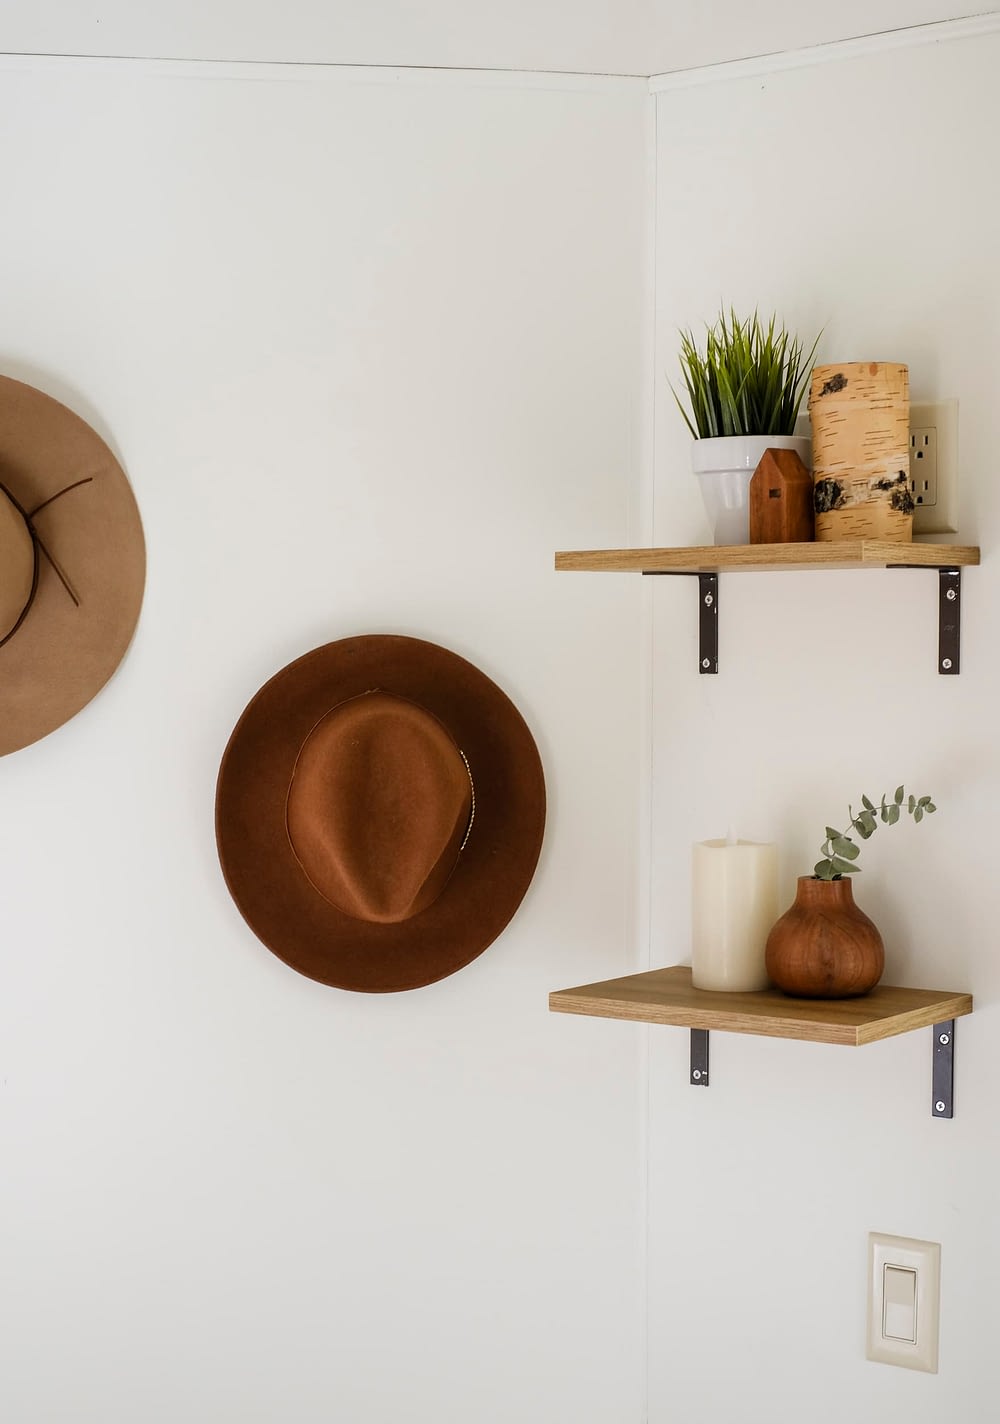 Open shelving on the wall and hats hung on a hook